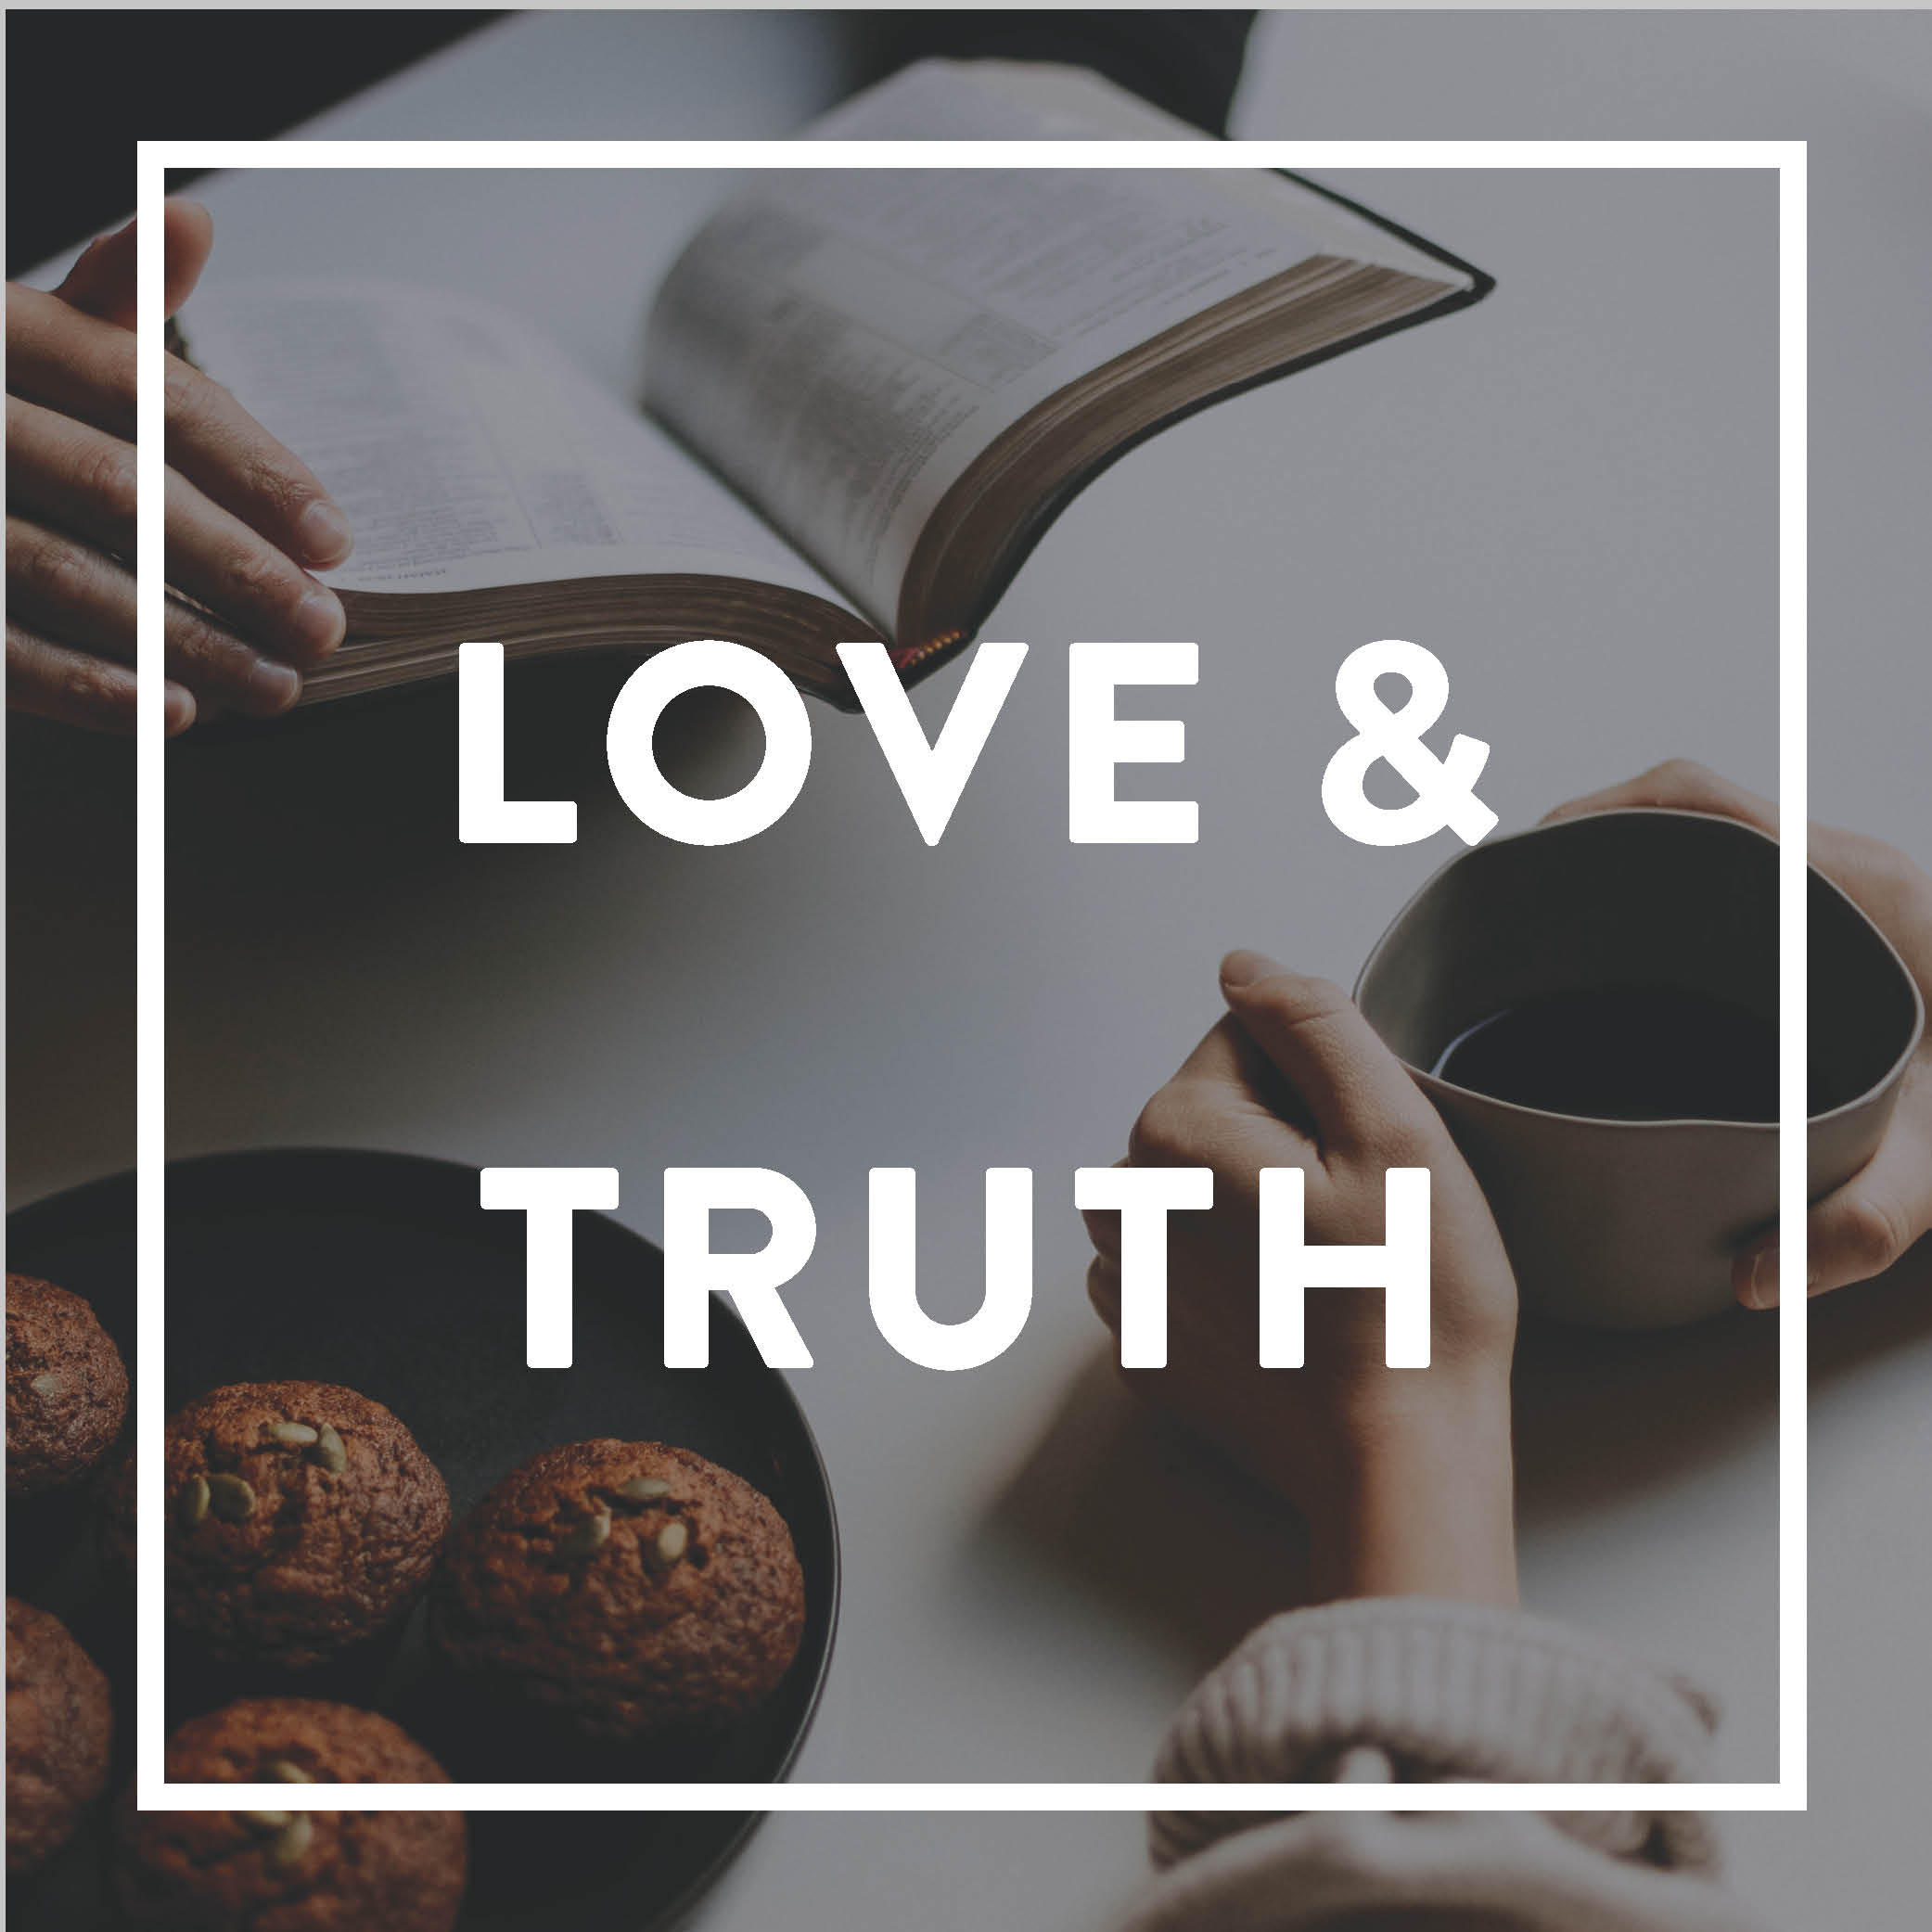 Love and truth